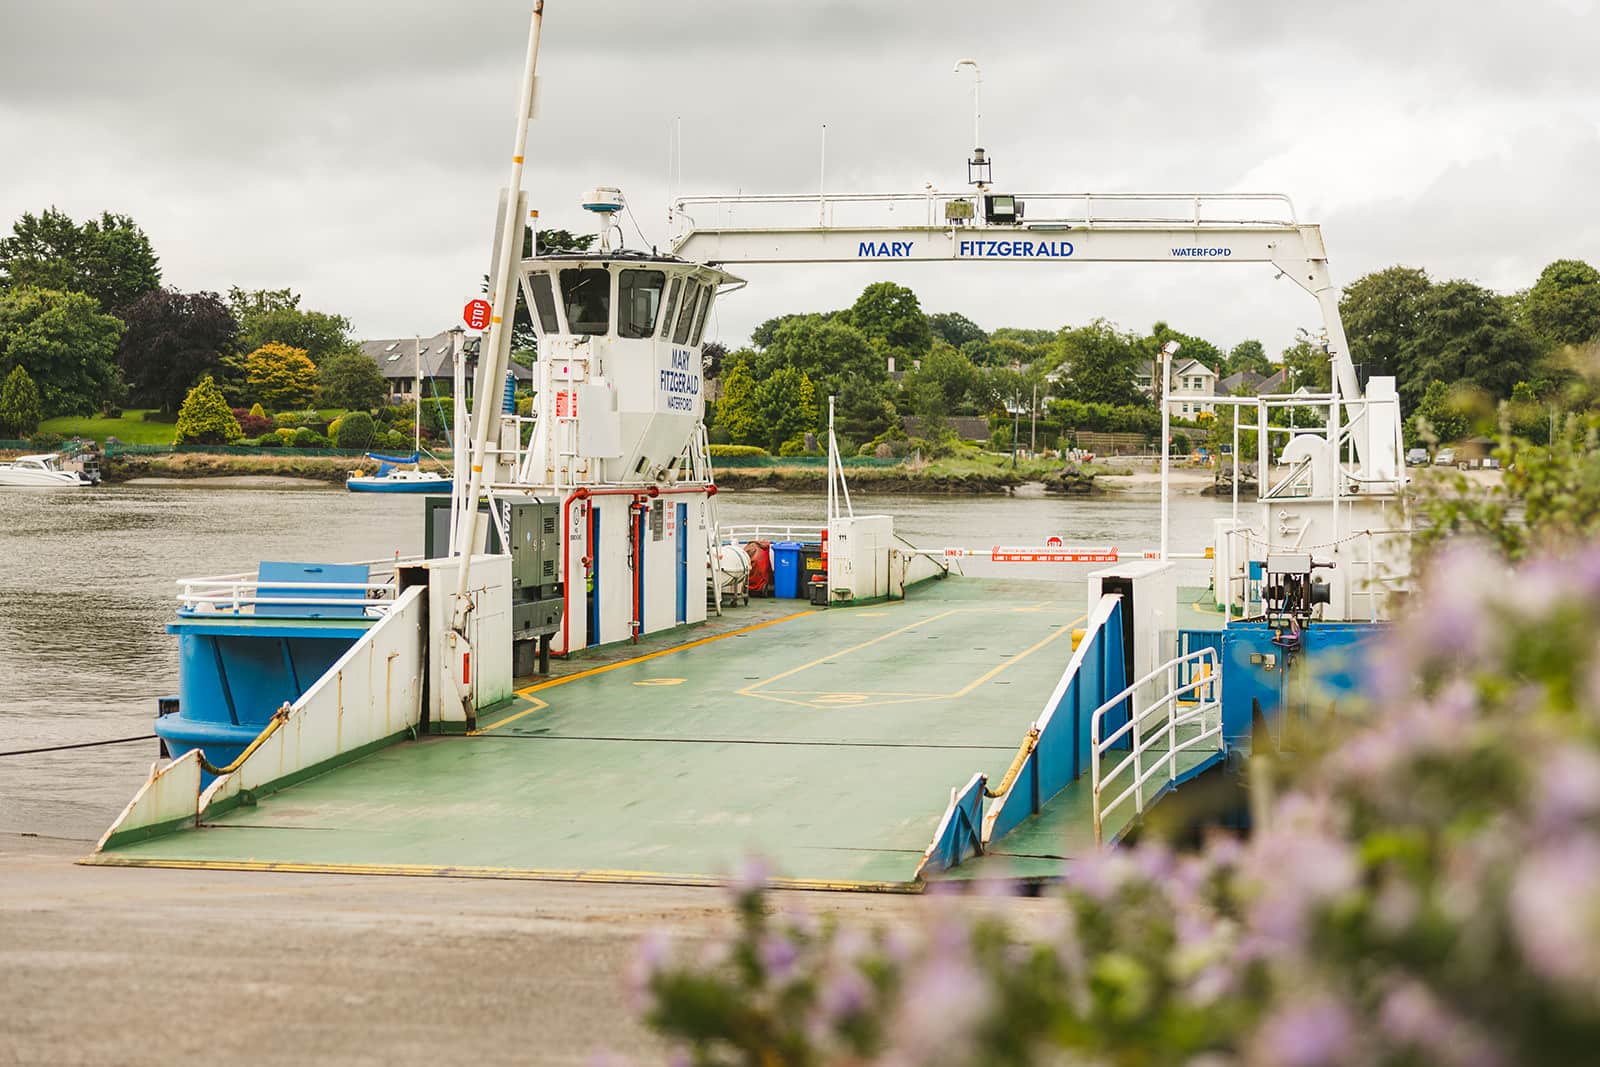 The ferry over to Waterford Castle